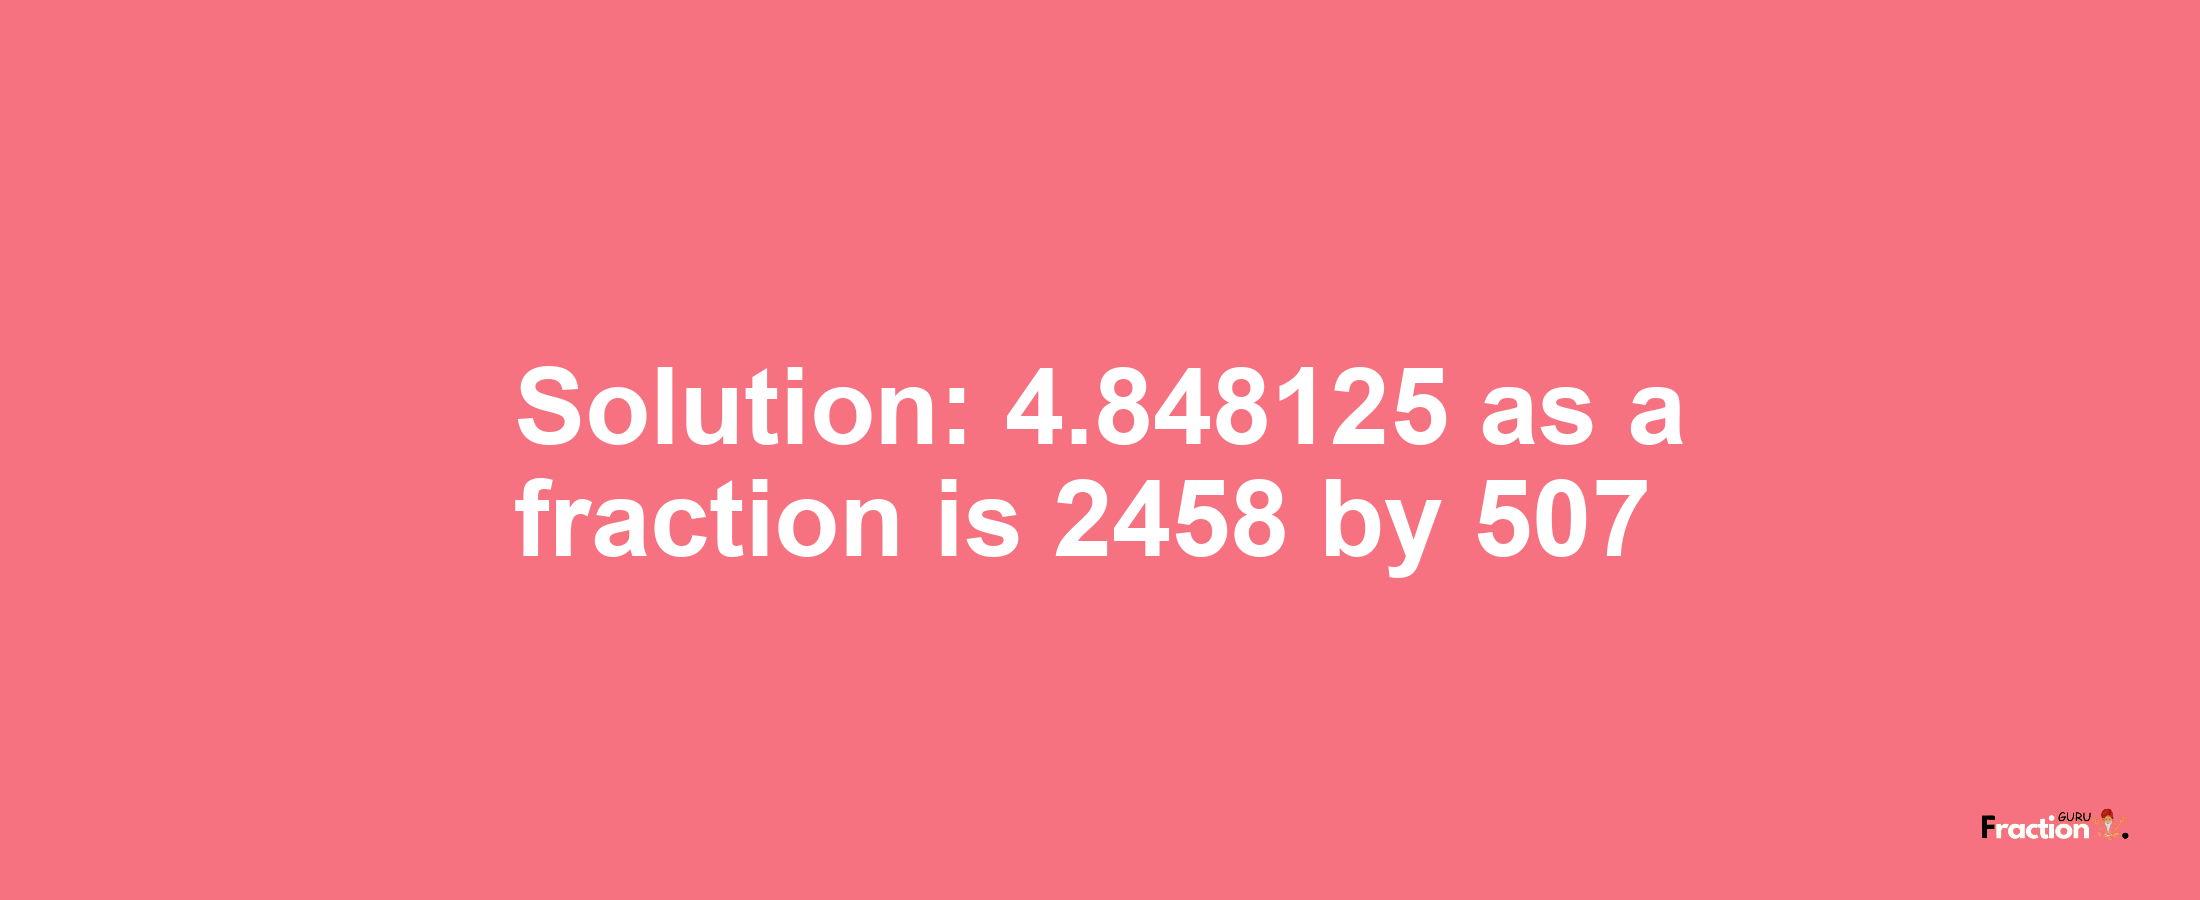 Solution:4.848125 as a fraction is 2458/507